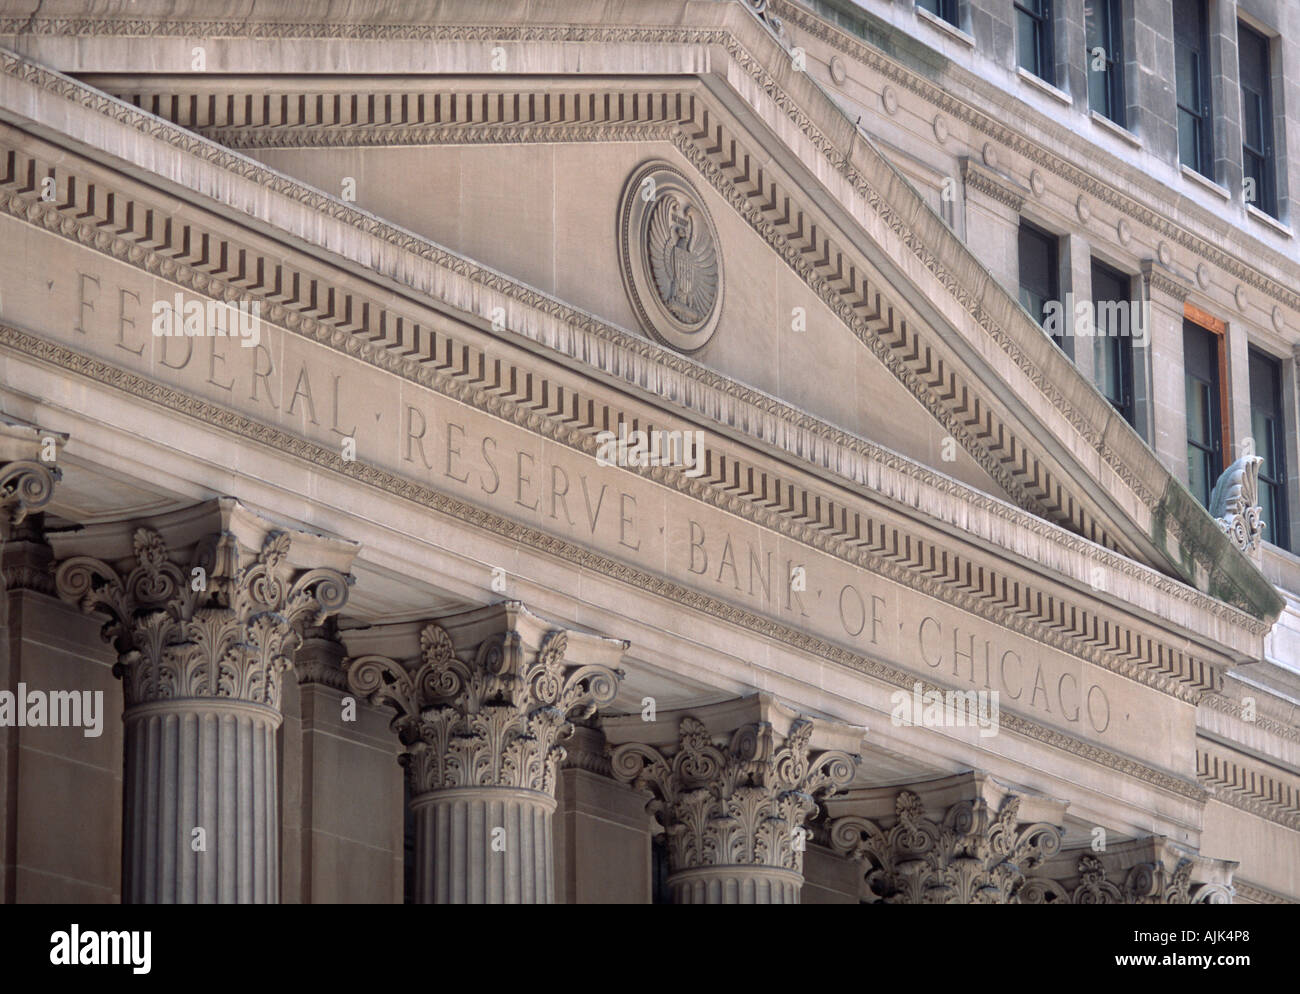 Facade of the Federal Reserve Bank of Chicago Stock Photo